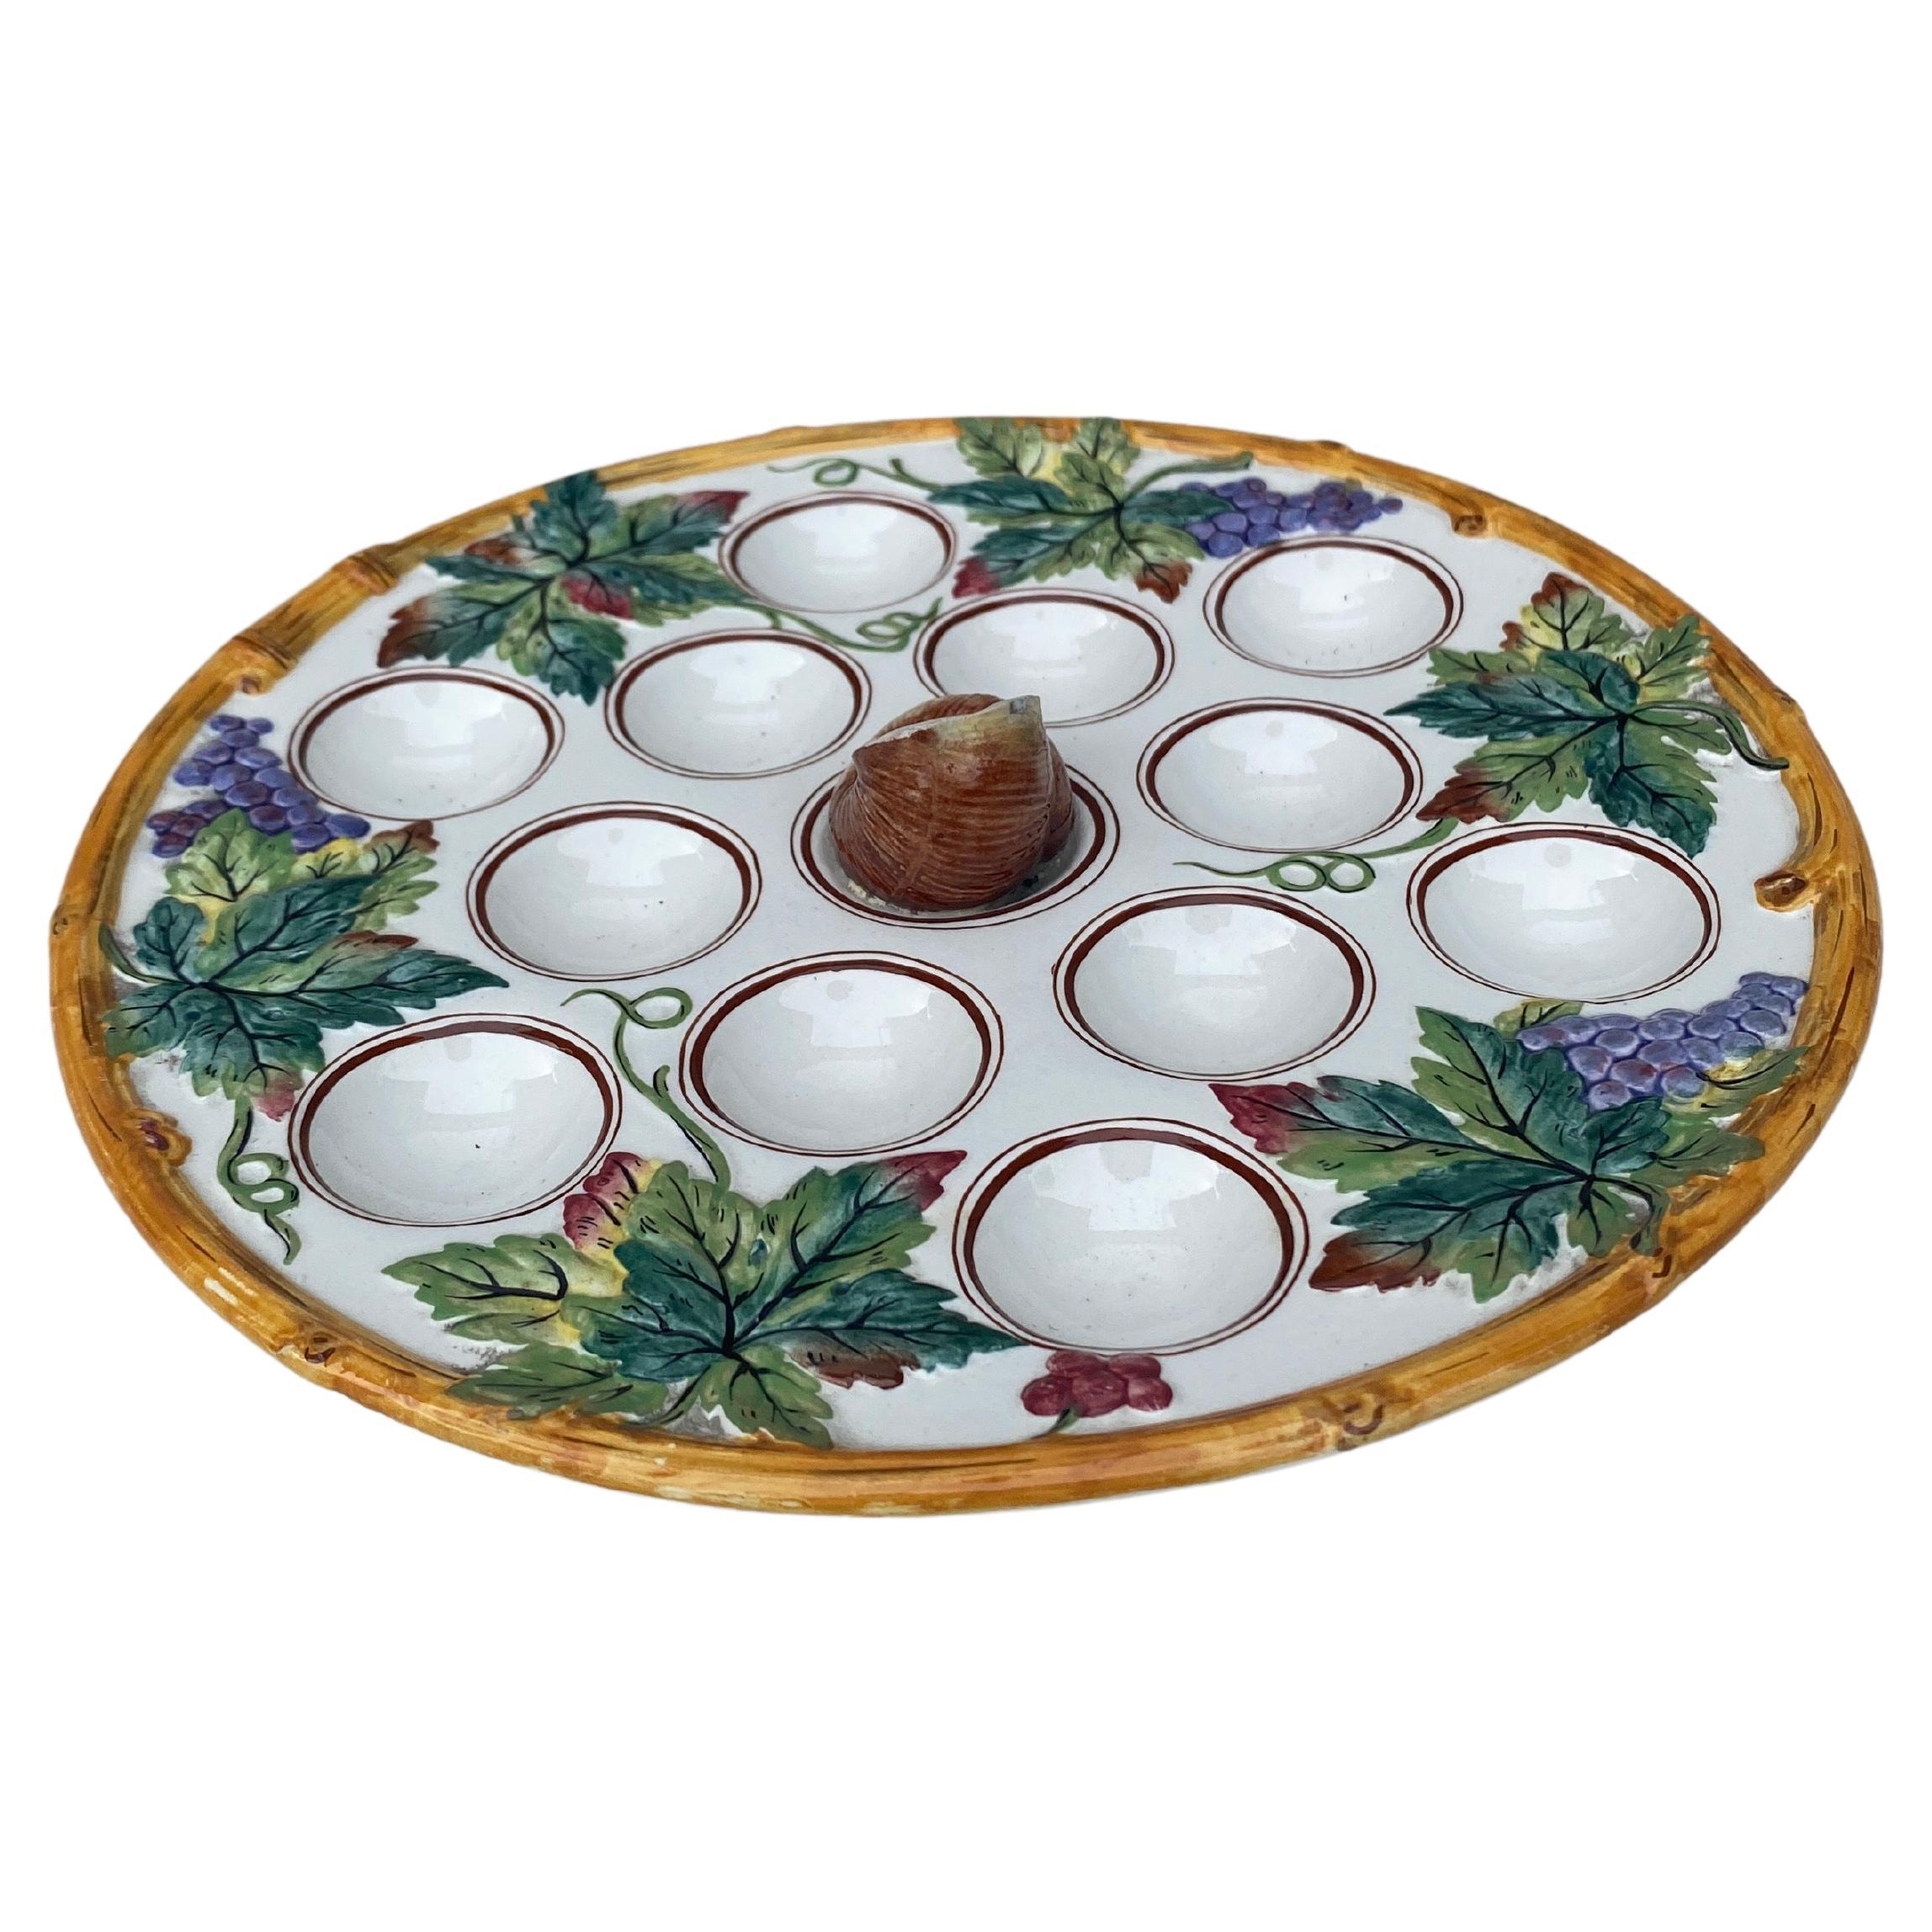 Unusual 19th century Majolica Snail Platter attributed to Luneville.
Decorated with grapes.